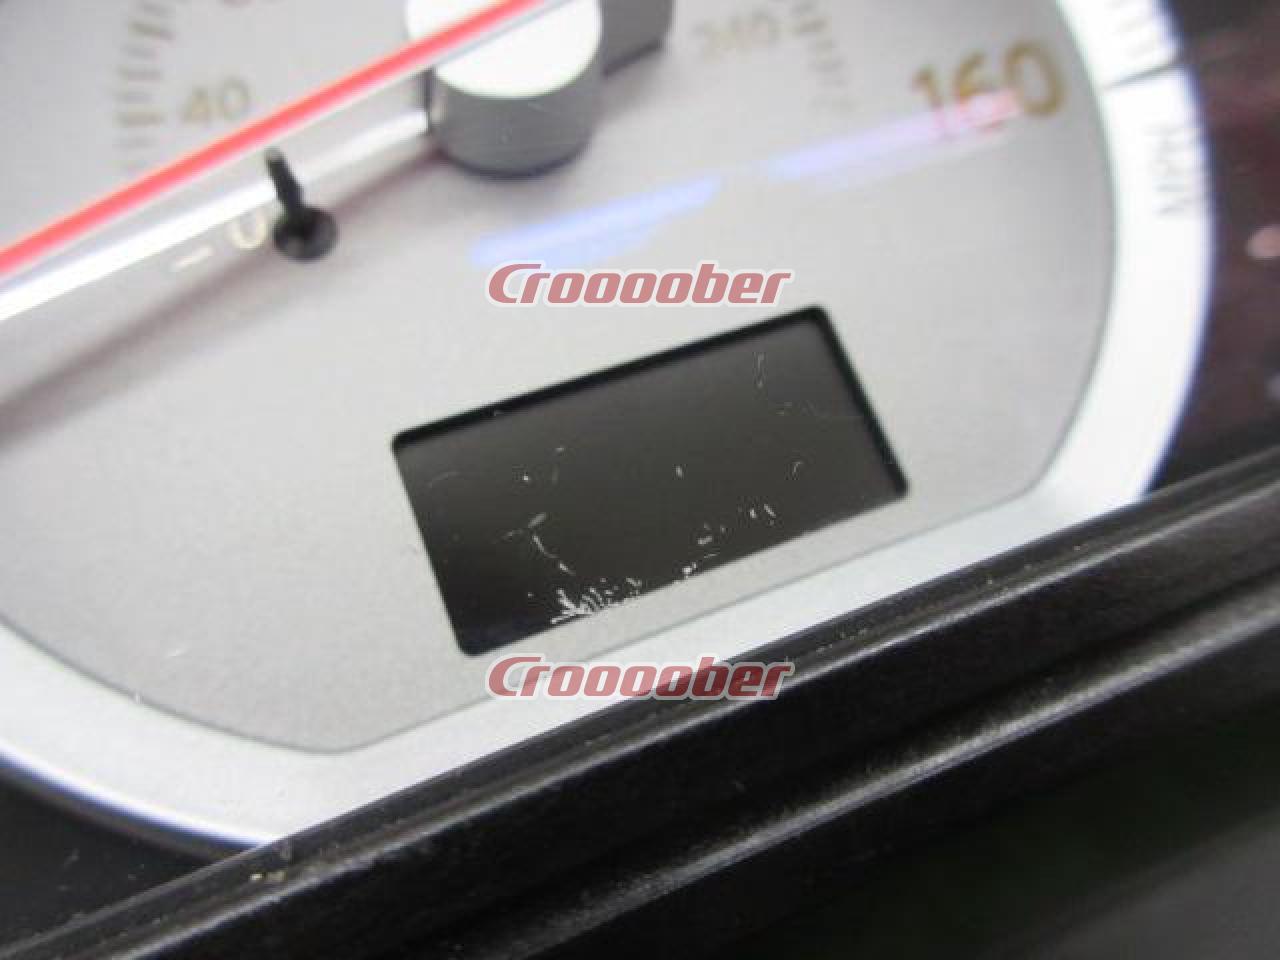 | Meter To US Croooober Murano Late / Price Z50 Version | Reduced!! North Specifications Genuine Accessories !! America NISSAN Meter